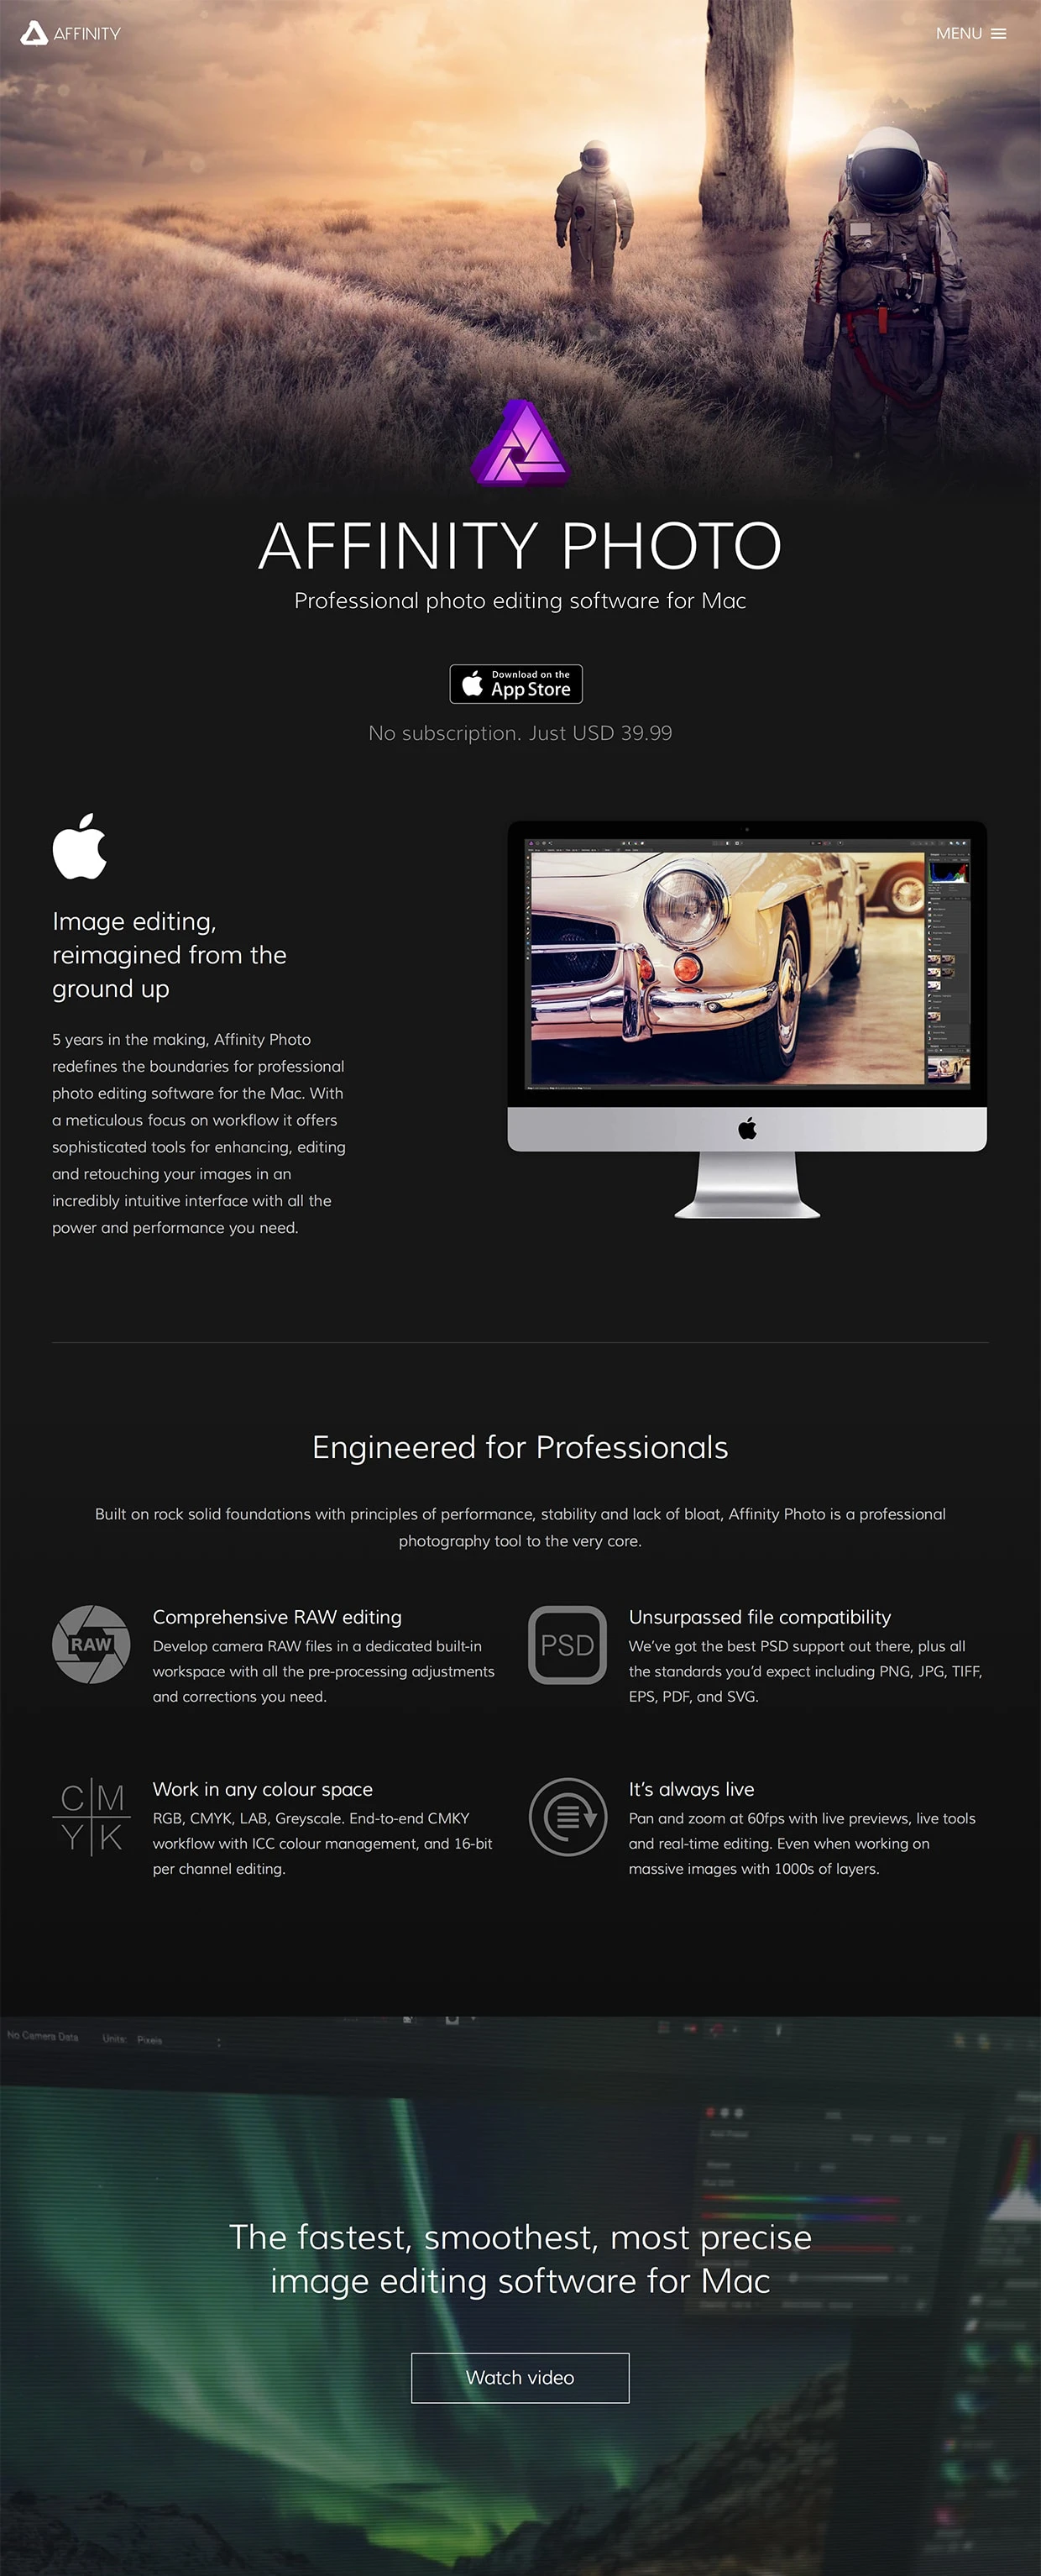 Affinity Photo Landing Page Example: Affinity Photo - the fastest, smoothest, most precise professional image editing software, exclusively for Mac.